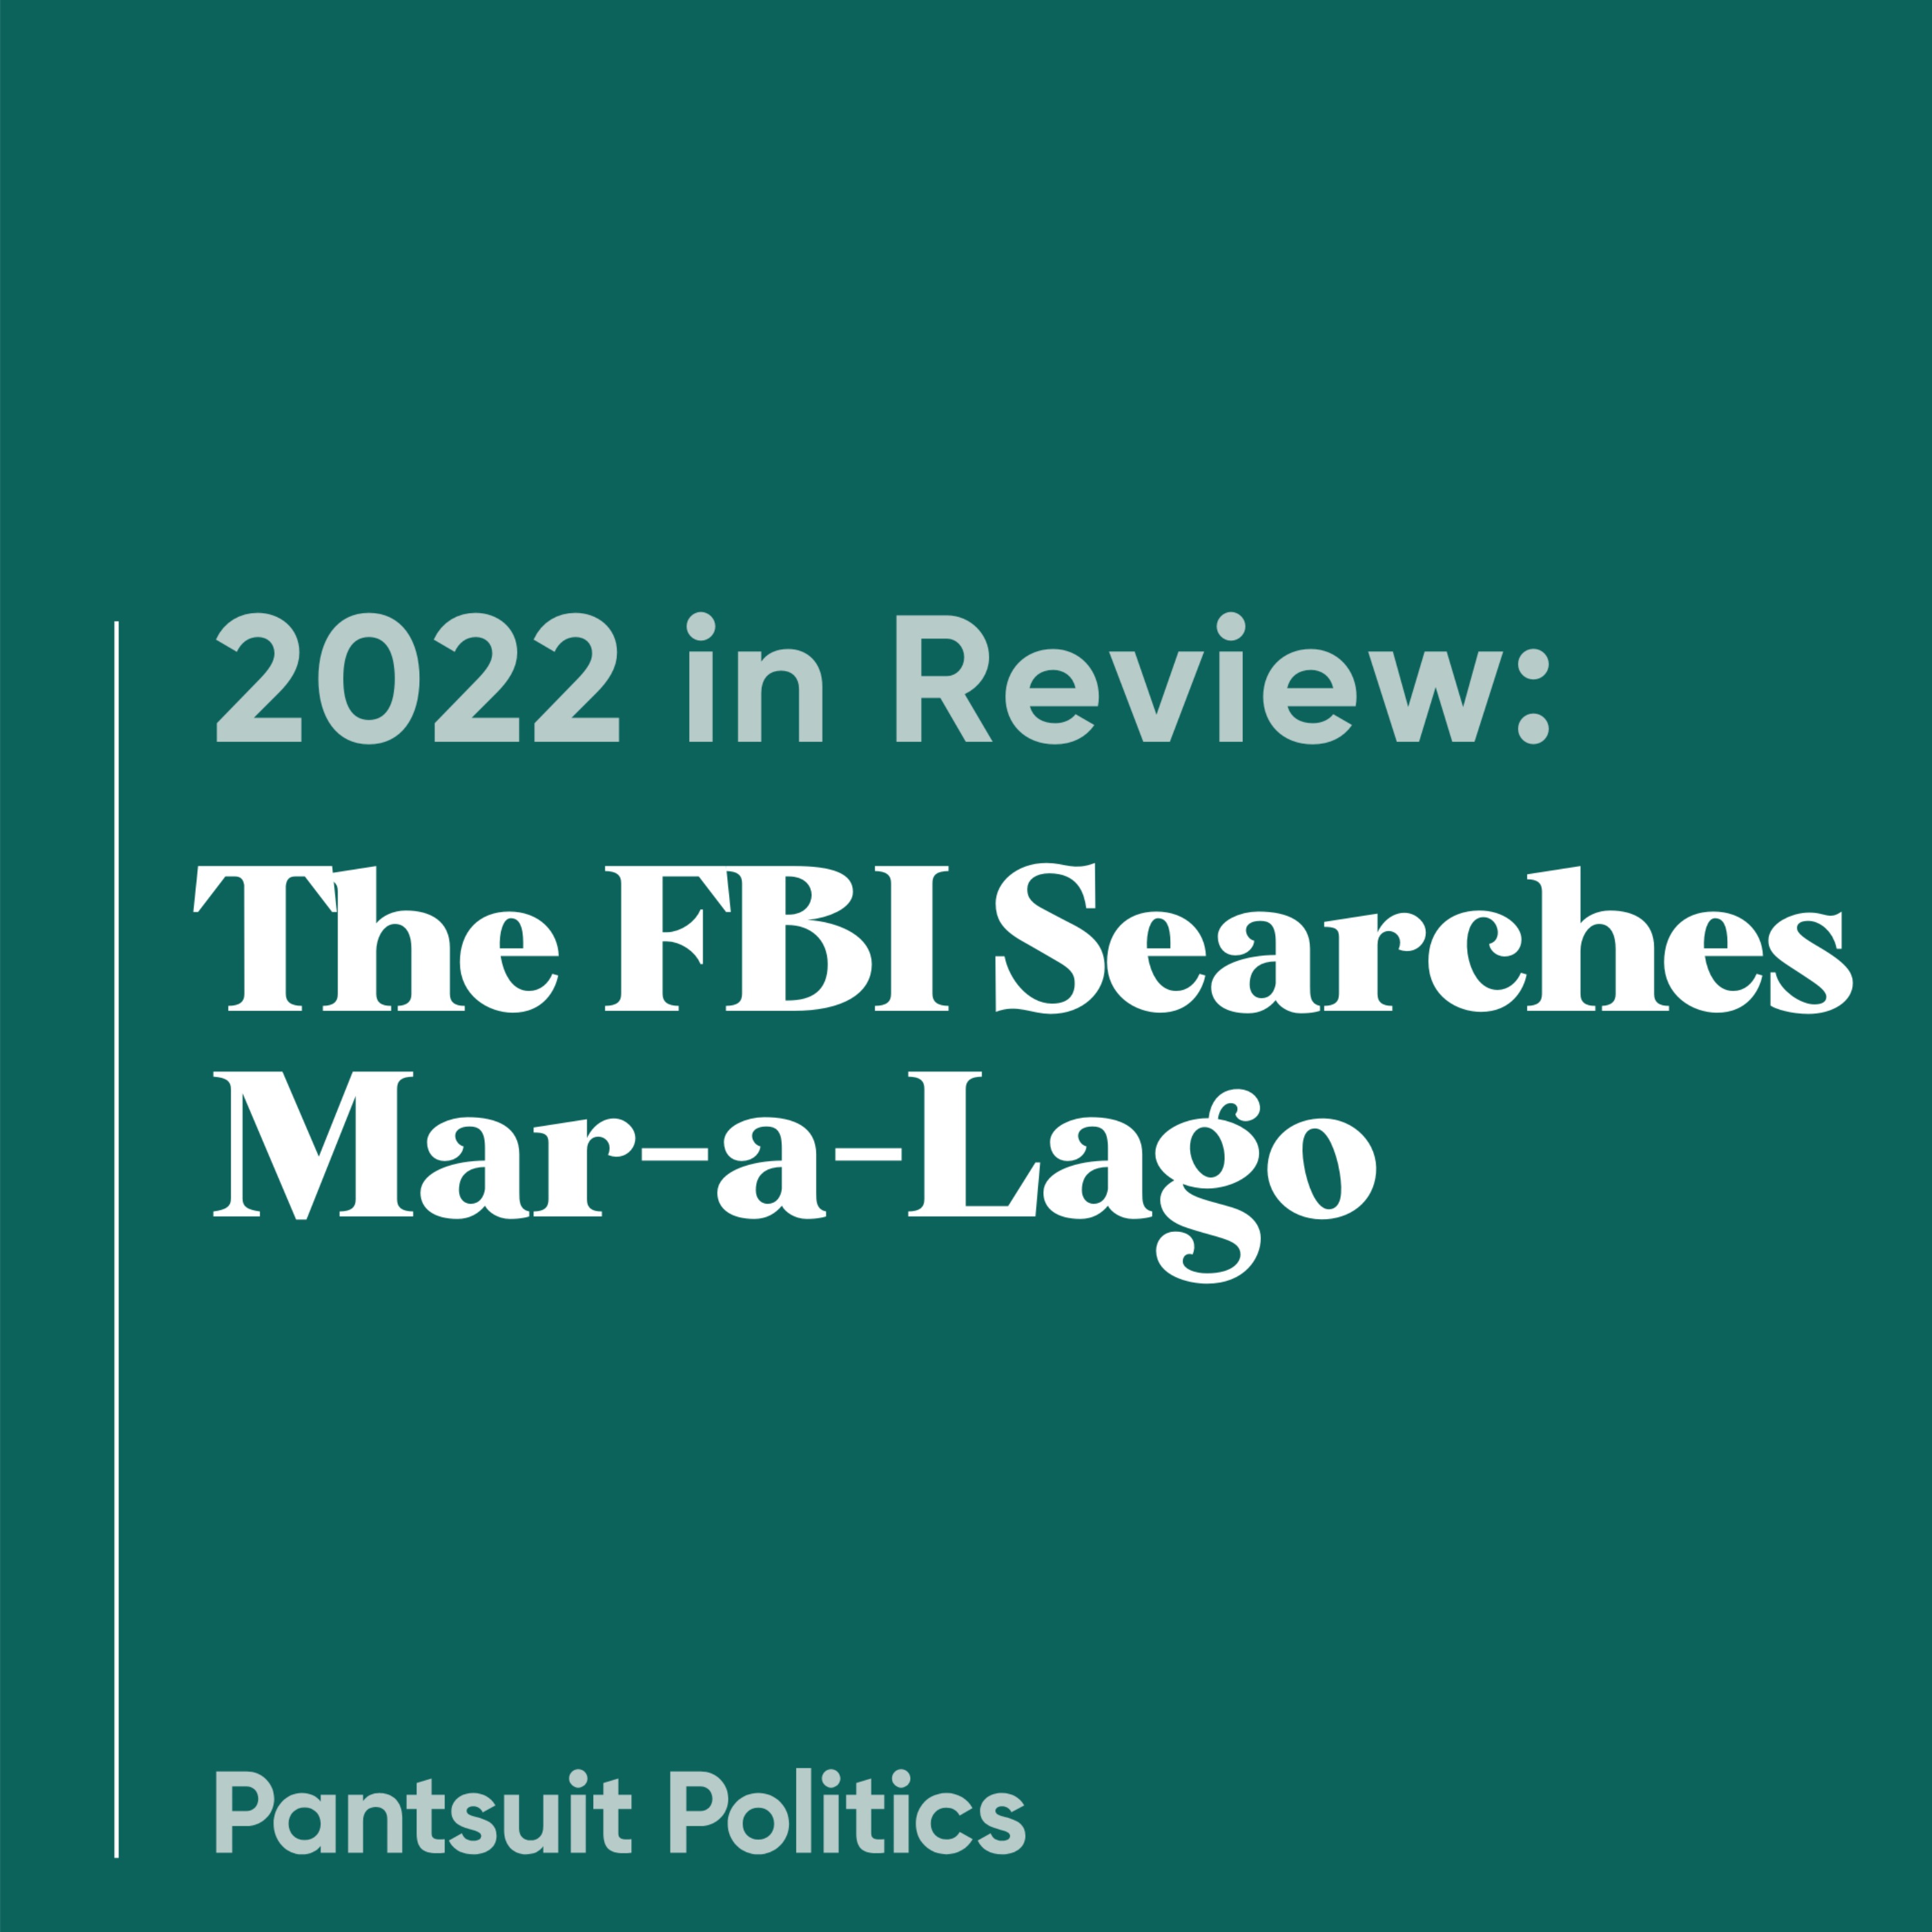 2022 in Review: The FBI Searches Mar-a-Lago